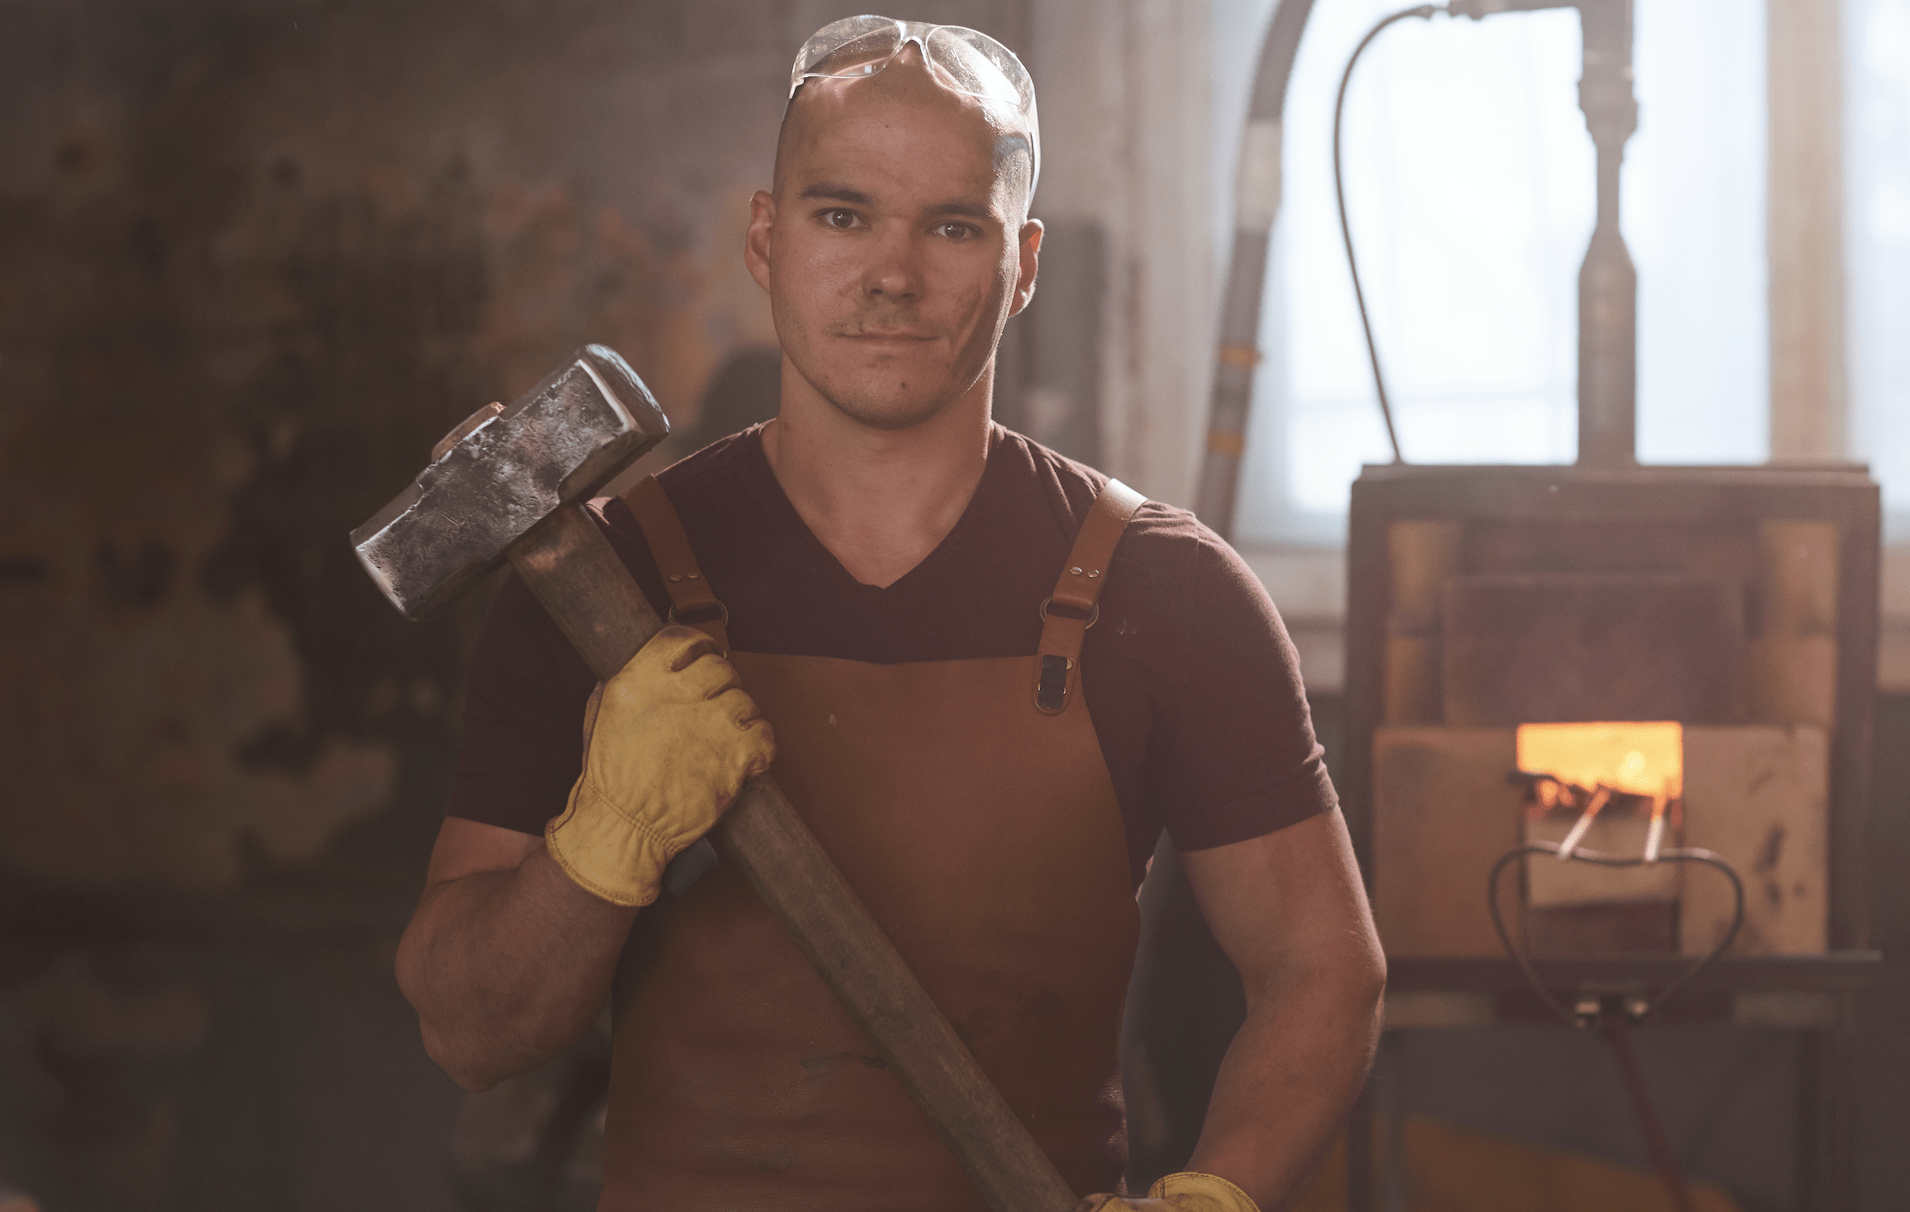 Man wearing safety glasses and work apron holding a sledgehammer.